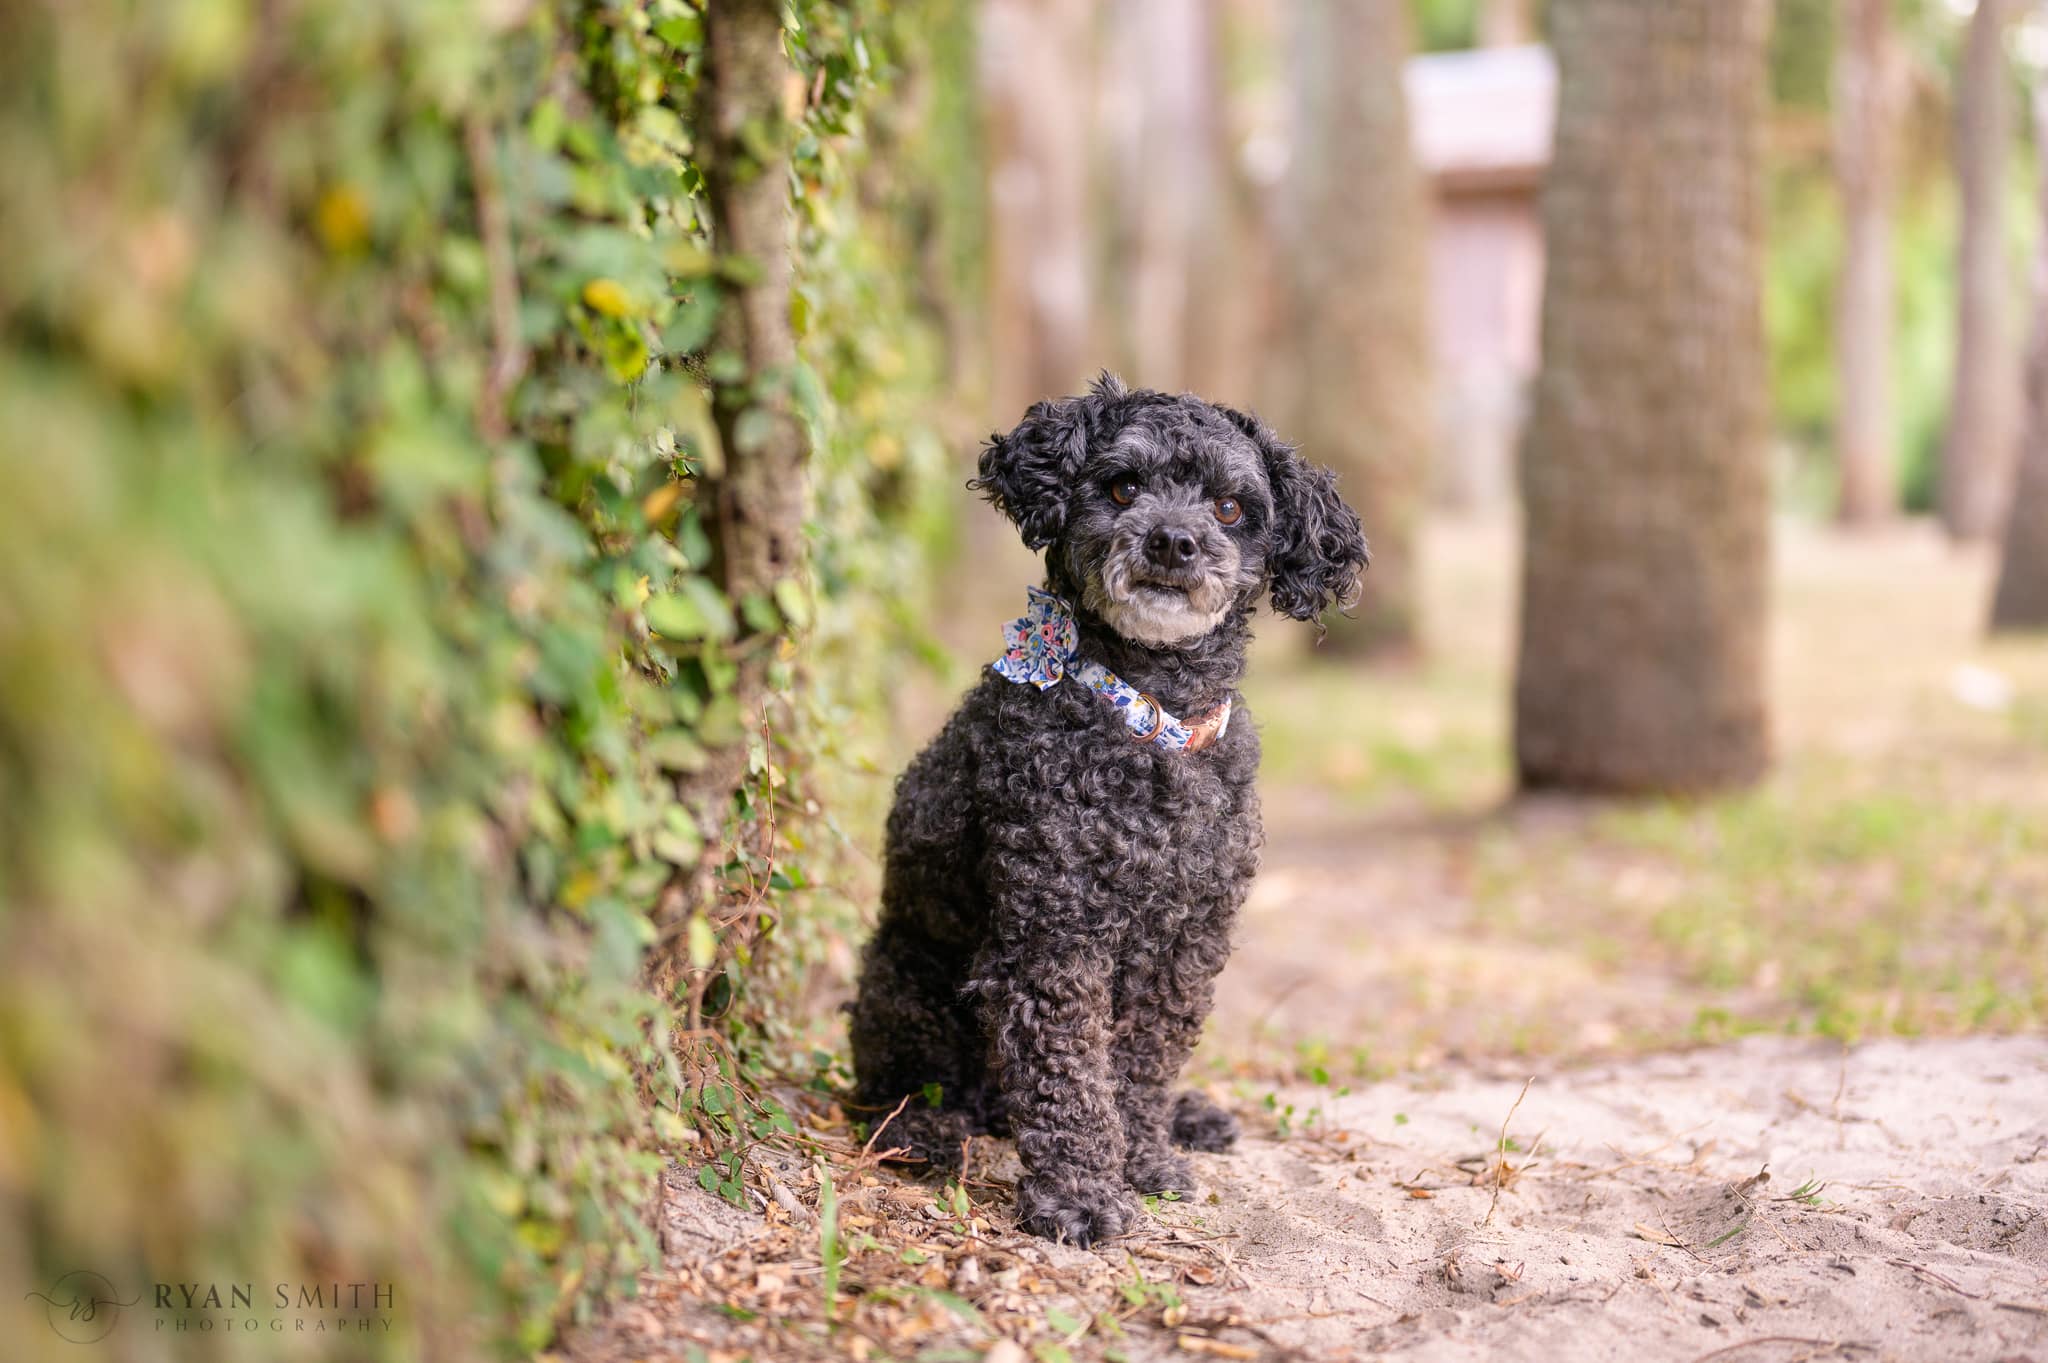 Poodle sitting by the ivy wall - Huntington Beach State Park